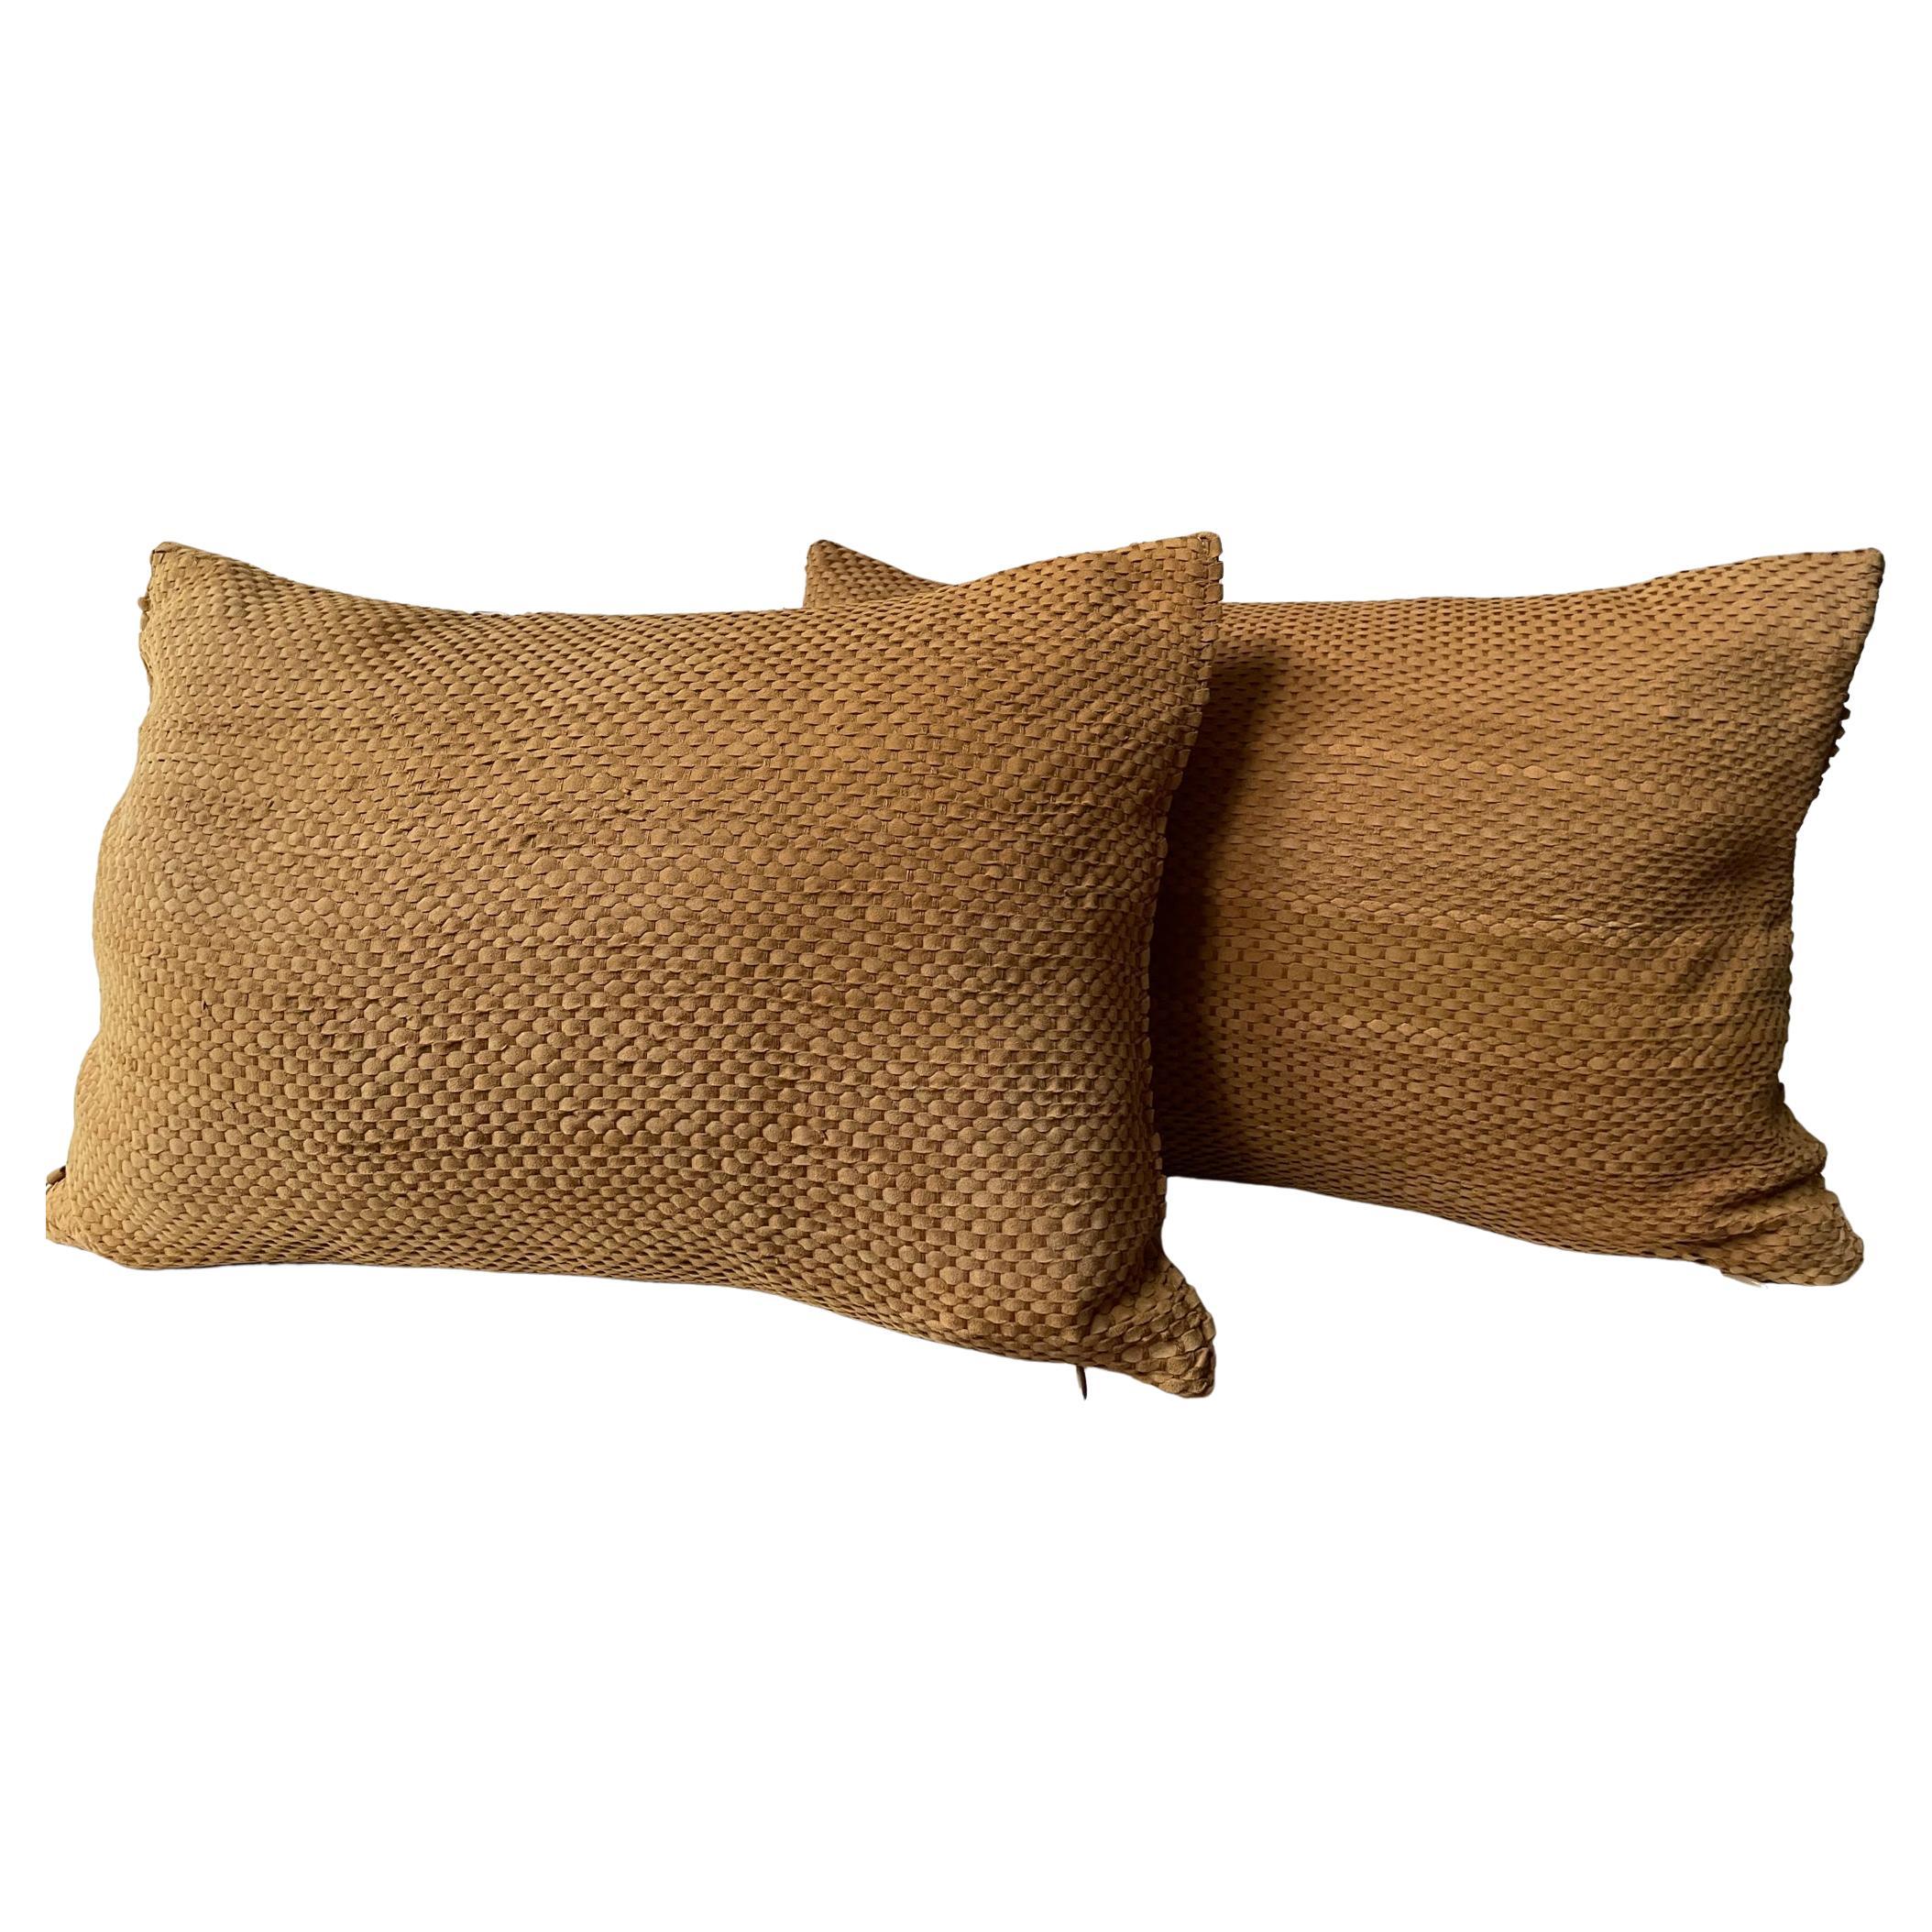 Pair Hand Woven Suede Cushions Colour Ginger Oblong Shape 